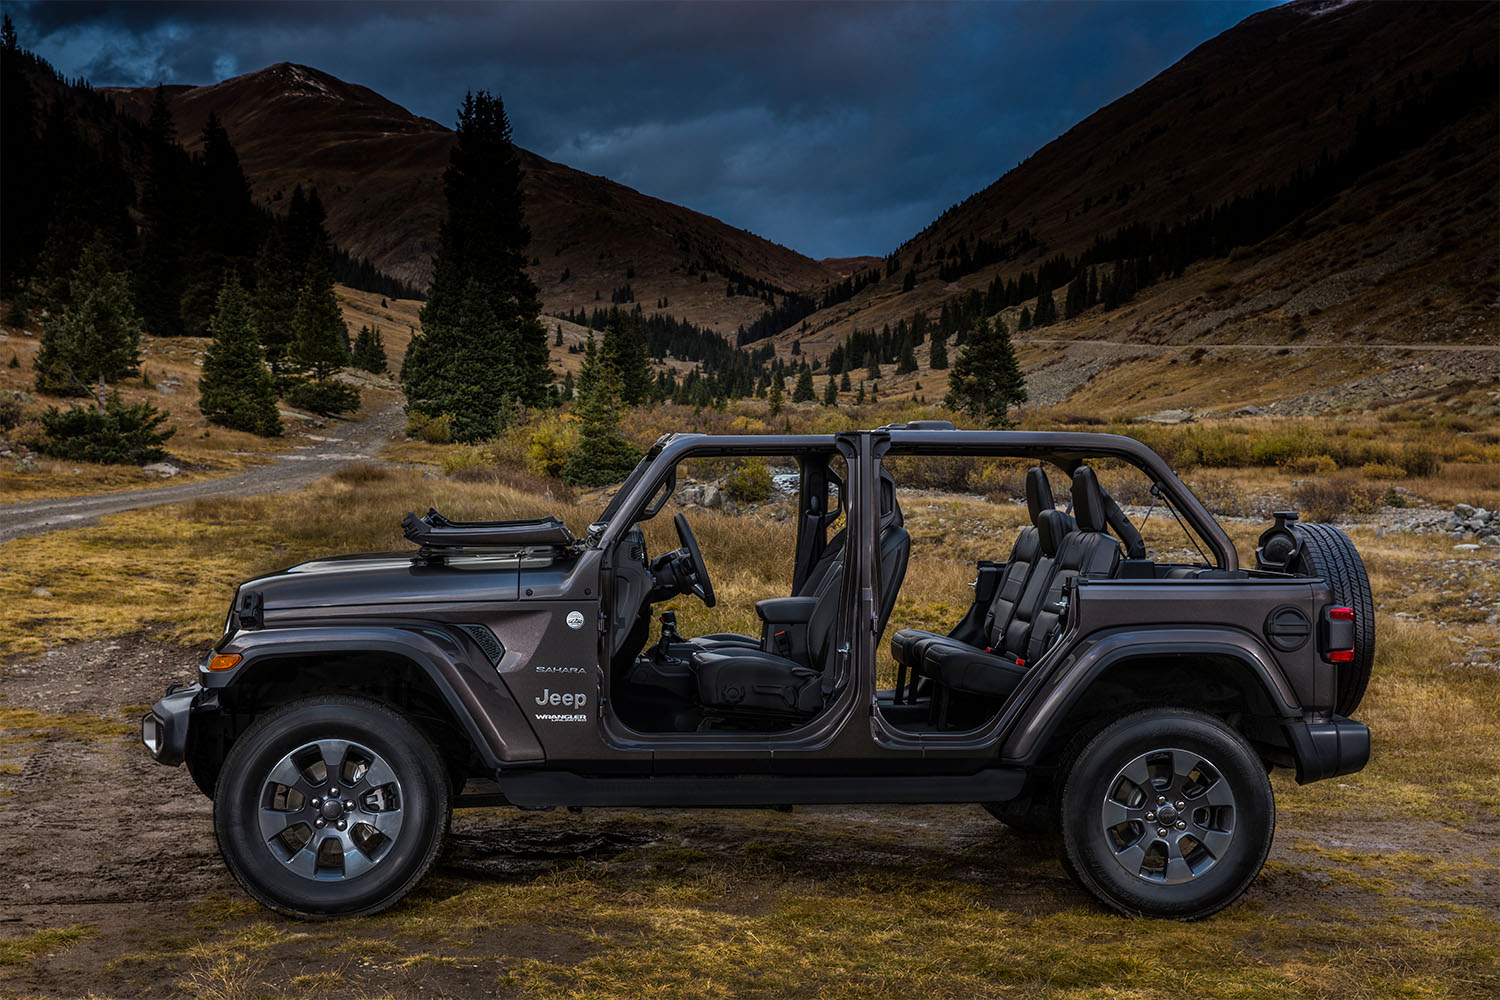 New Jeep available in Albany, NY at Armory Garage Chrysler Jeep Dodge Ram